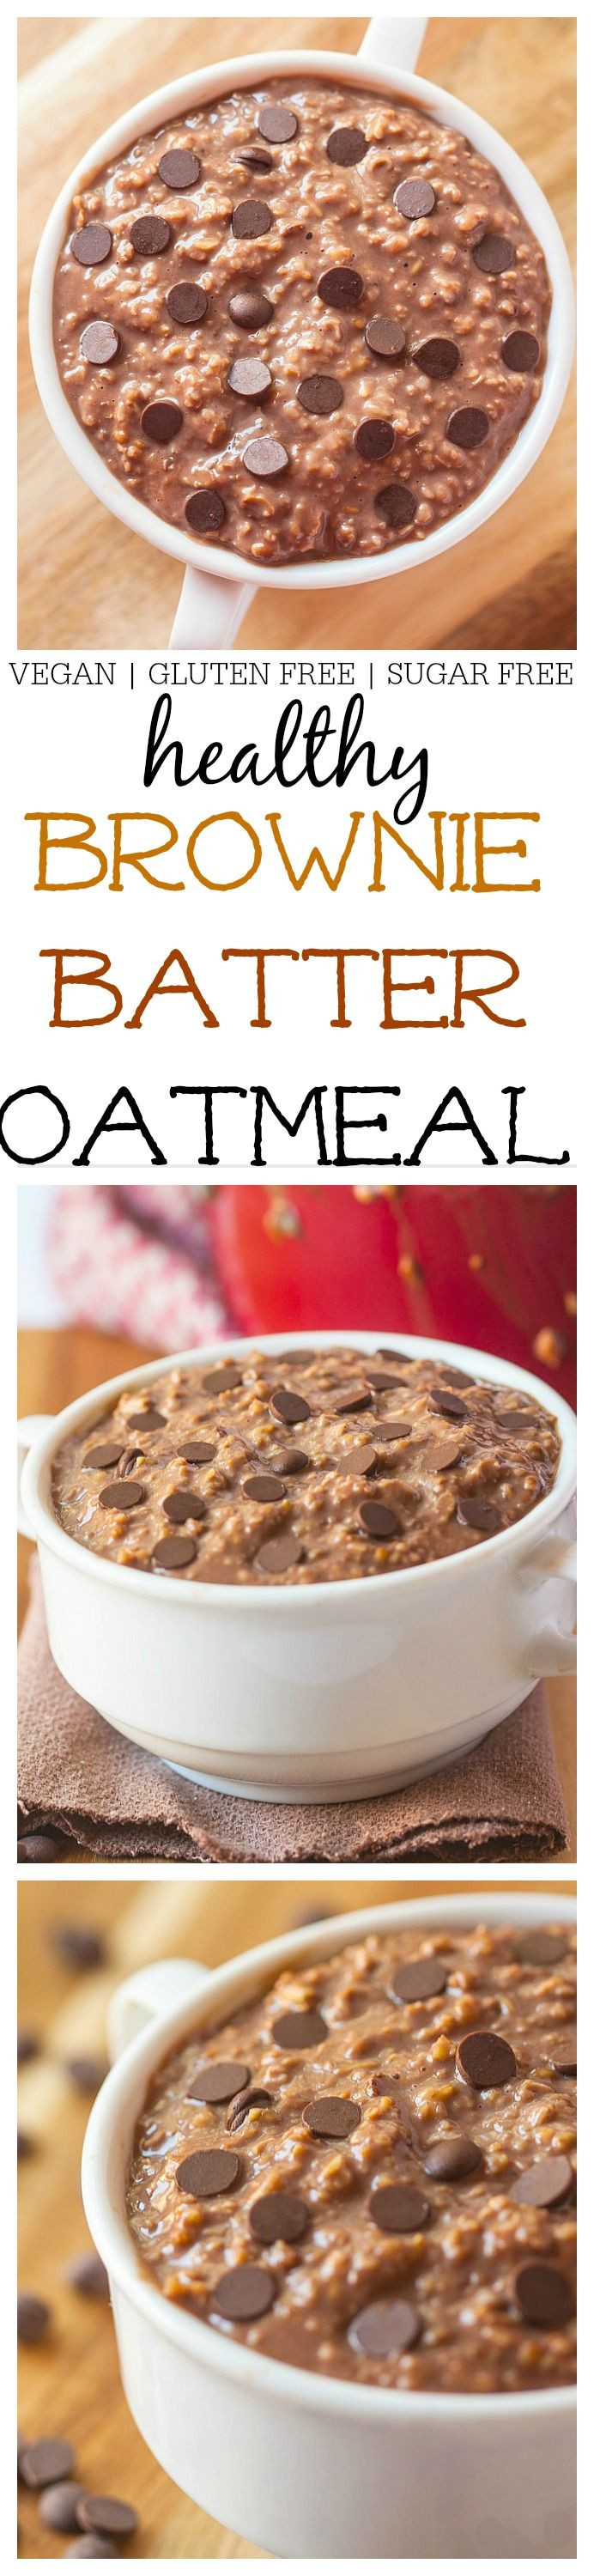 Healthy Oatmeal Desserts
 The Ultimate Healthy  Brownie Batter Oatmeal Just like